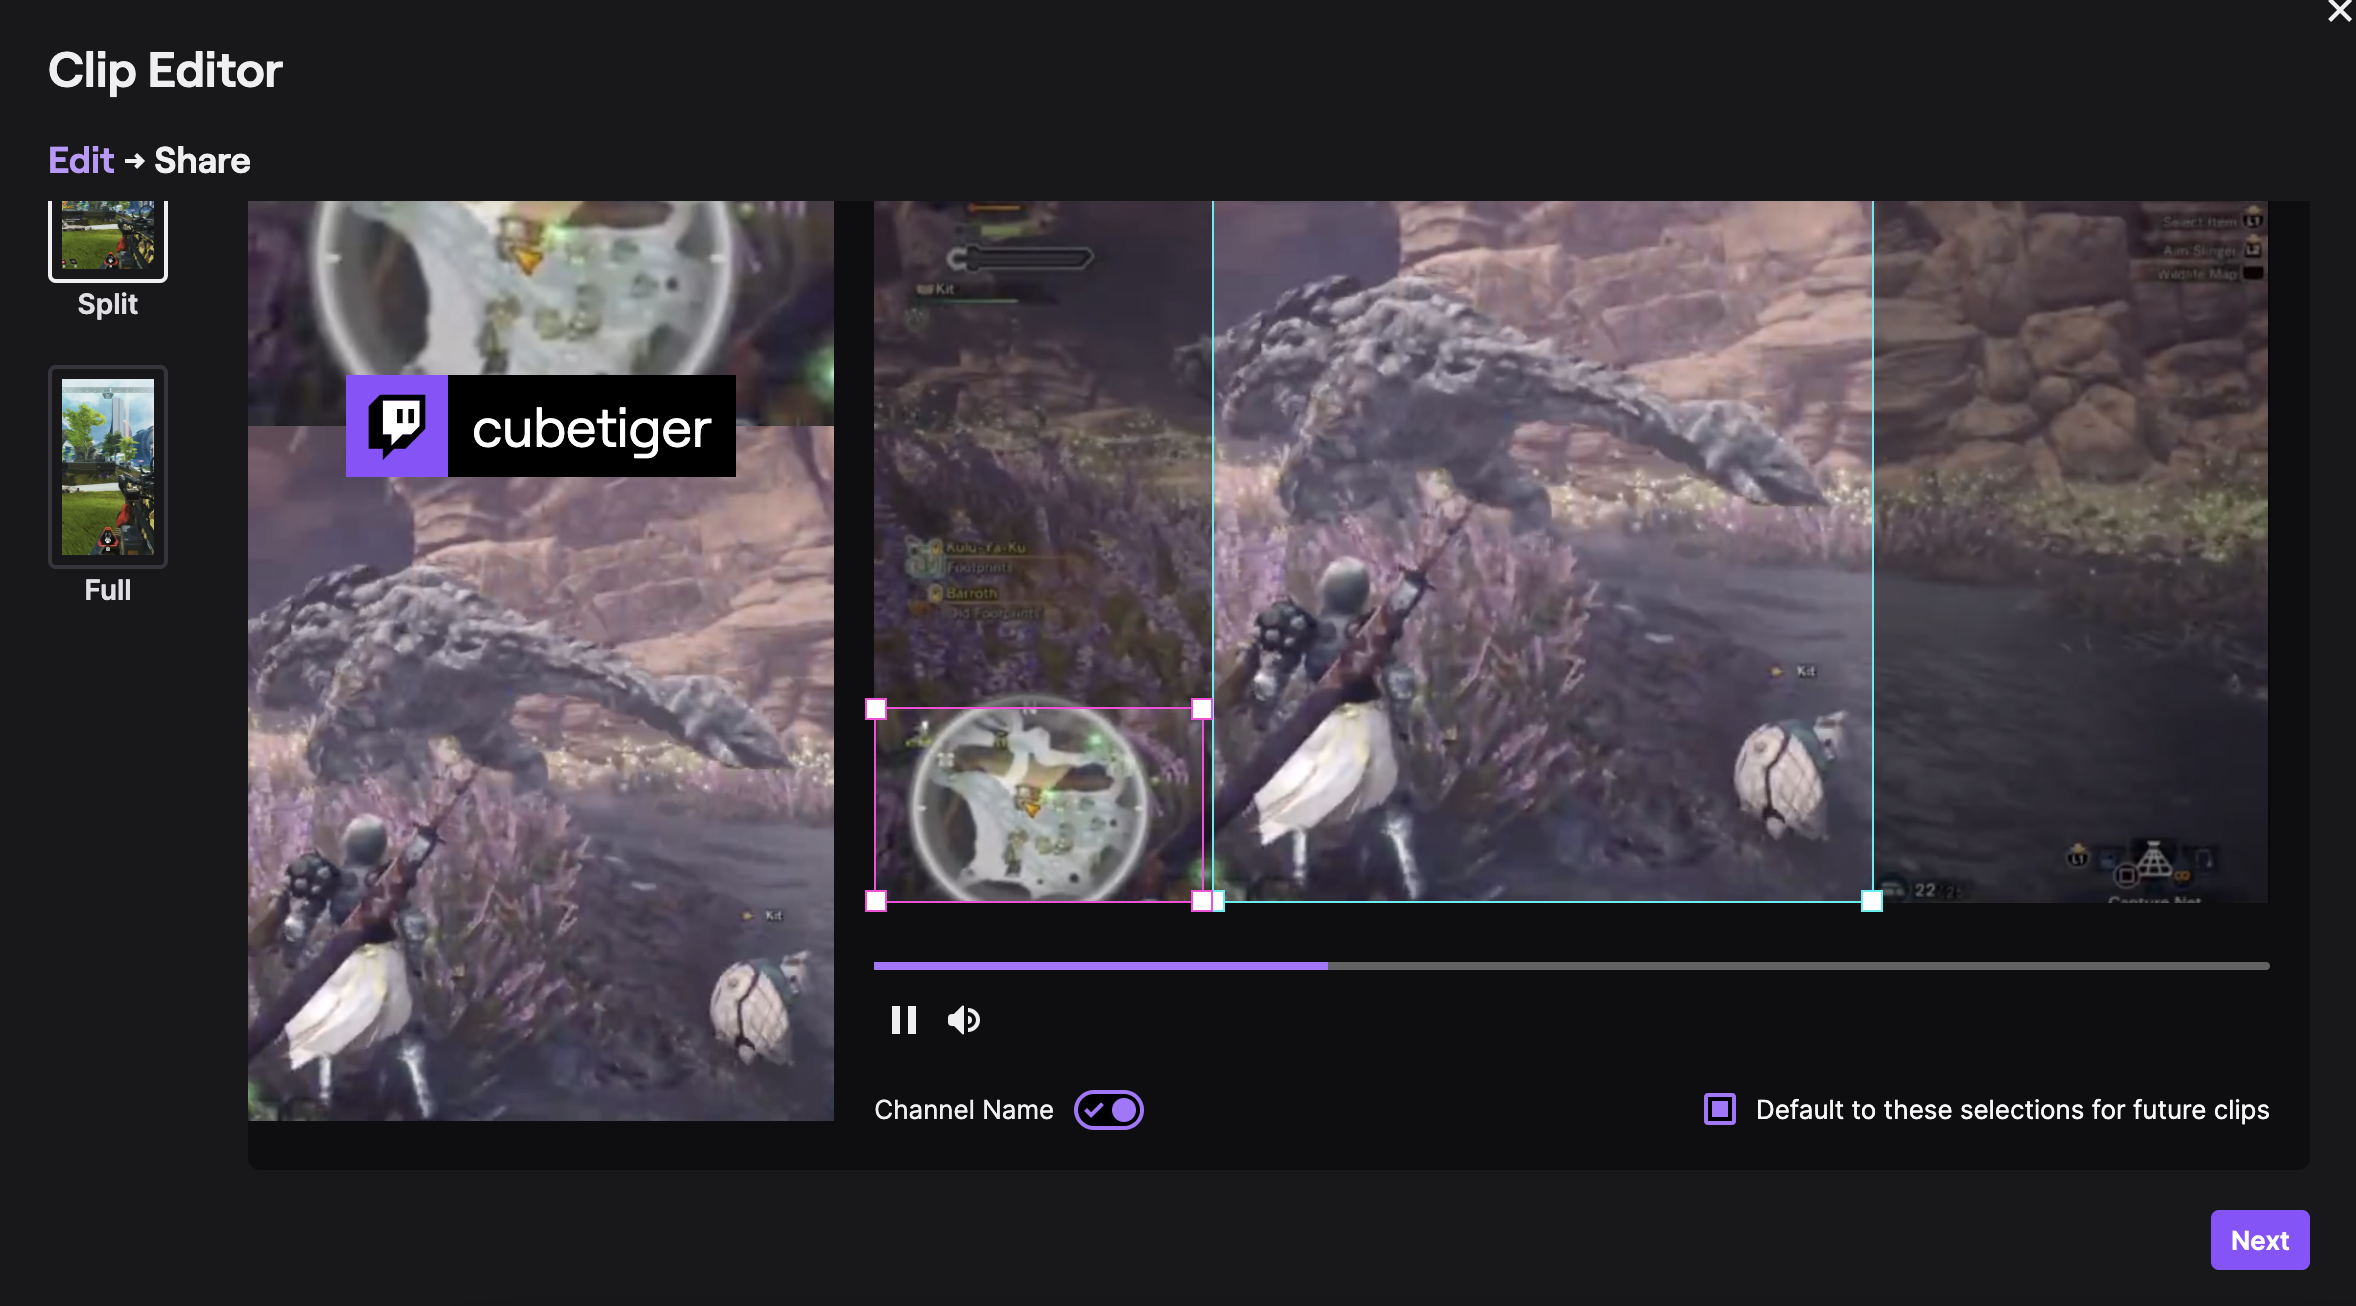 Twitch clip editor for short-form vertical video clips